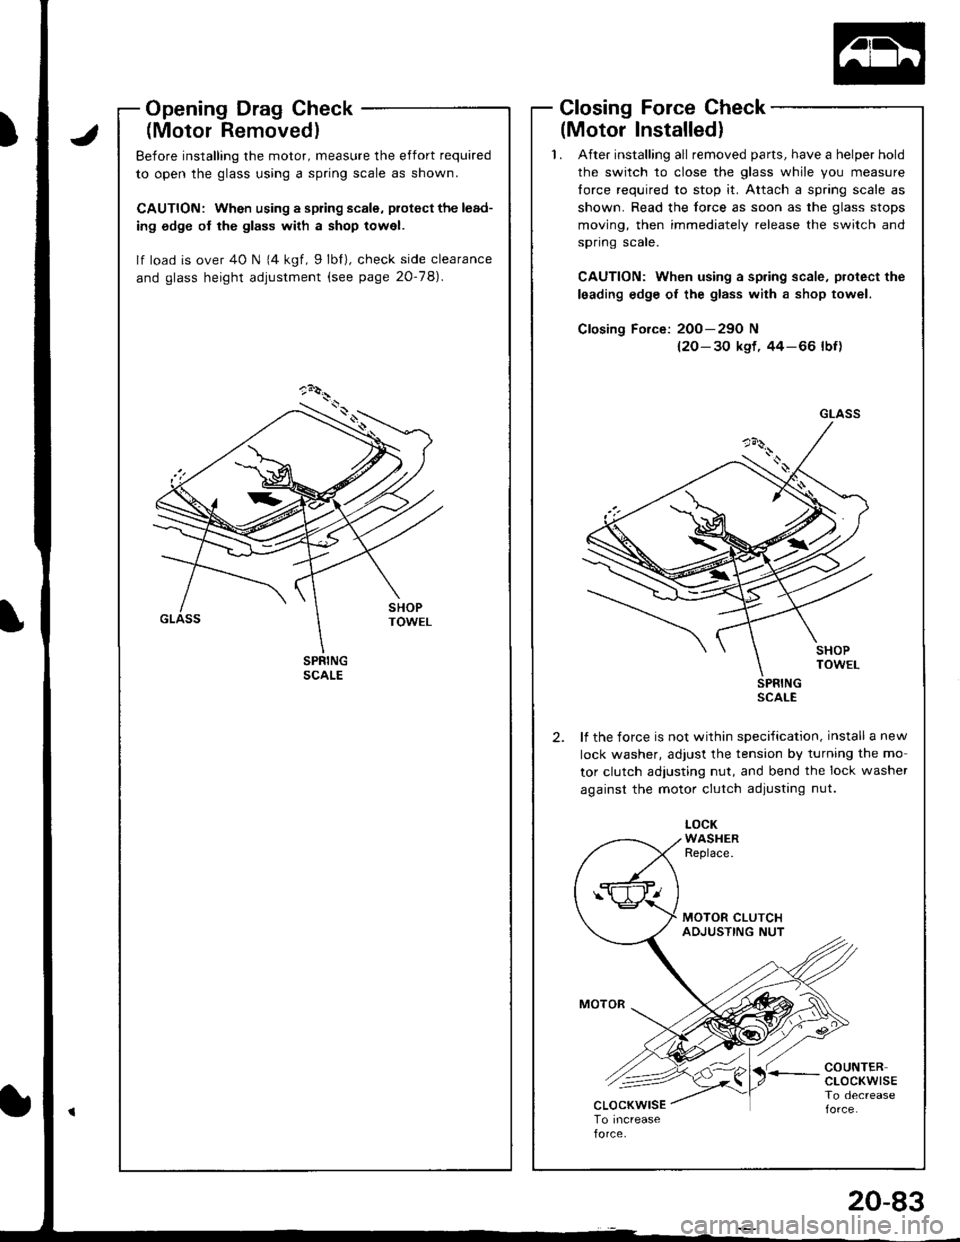 ACURA INTEGRA 1998  Service Repair Manual OpeningDragGheck
(Motor Removedl
Before installing the motor, measure the effort required
to open the glass using a spring scale as shown.
CAUTION: Wh€n using a spring scale, piotect the lead-
ing o